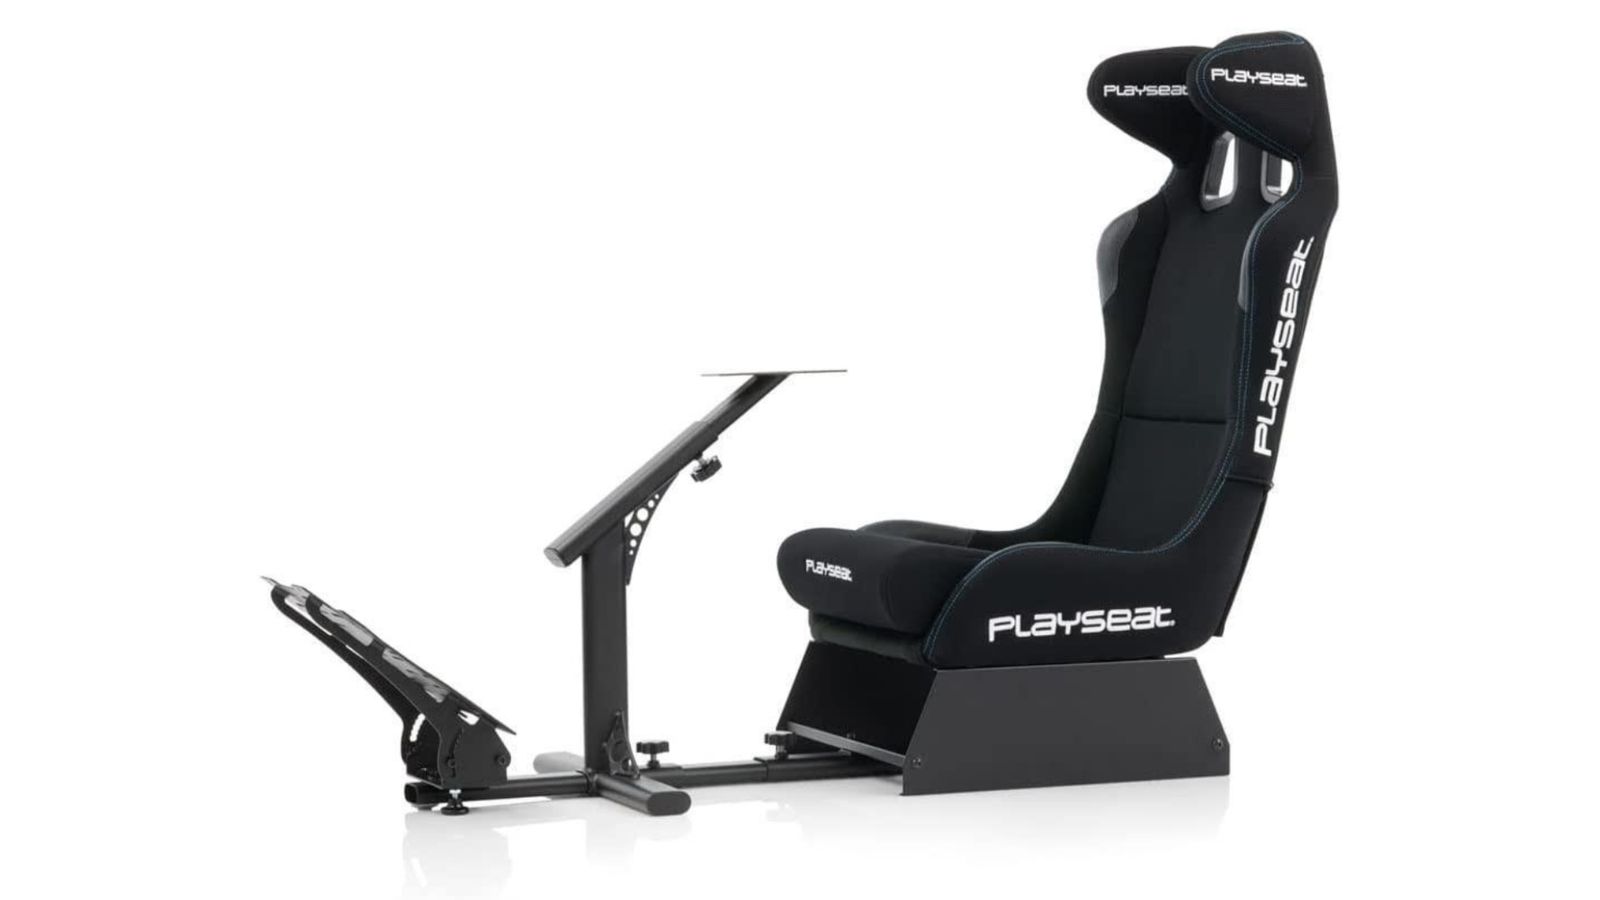 Playseat Evolution Alcantara PRO product image of a black seat with white branding connected to a wheel mount.